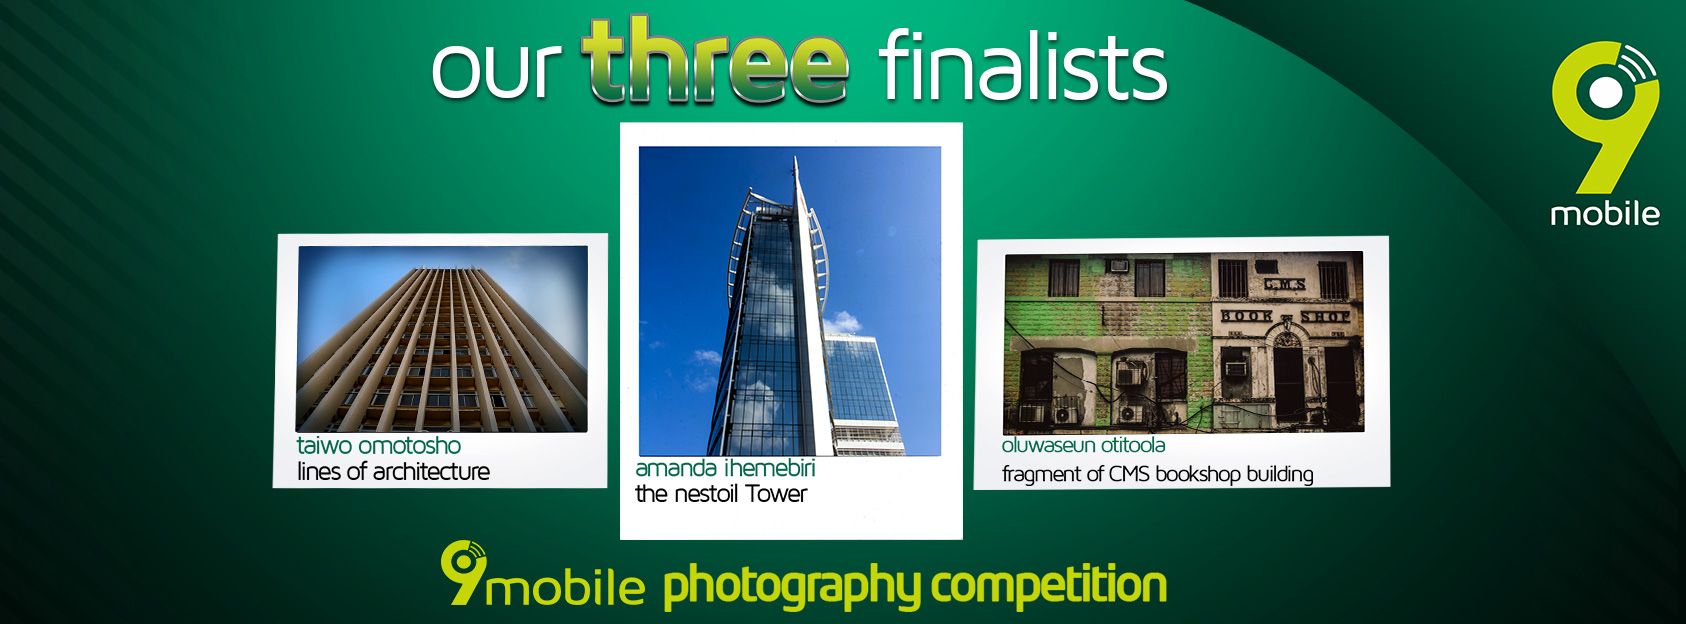 9mobile Photography Competition Announces Top 3 Finalists and Winner, Voters’ Choice